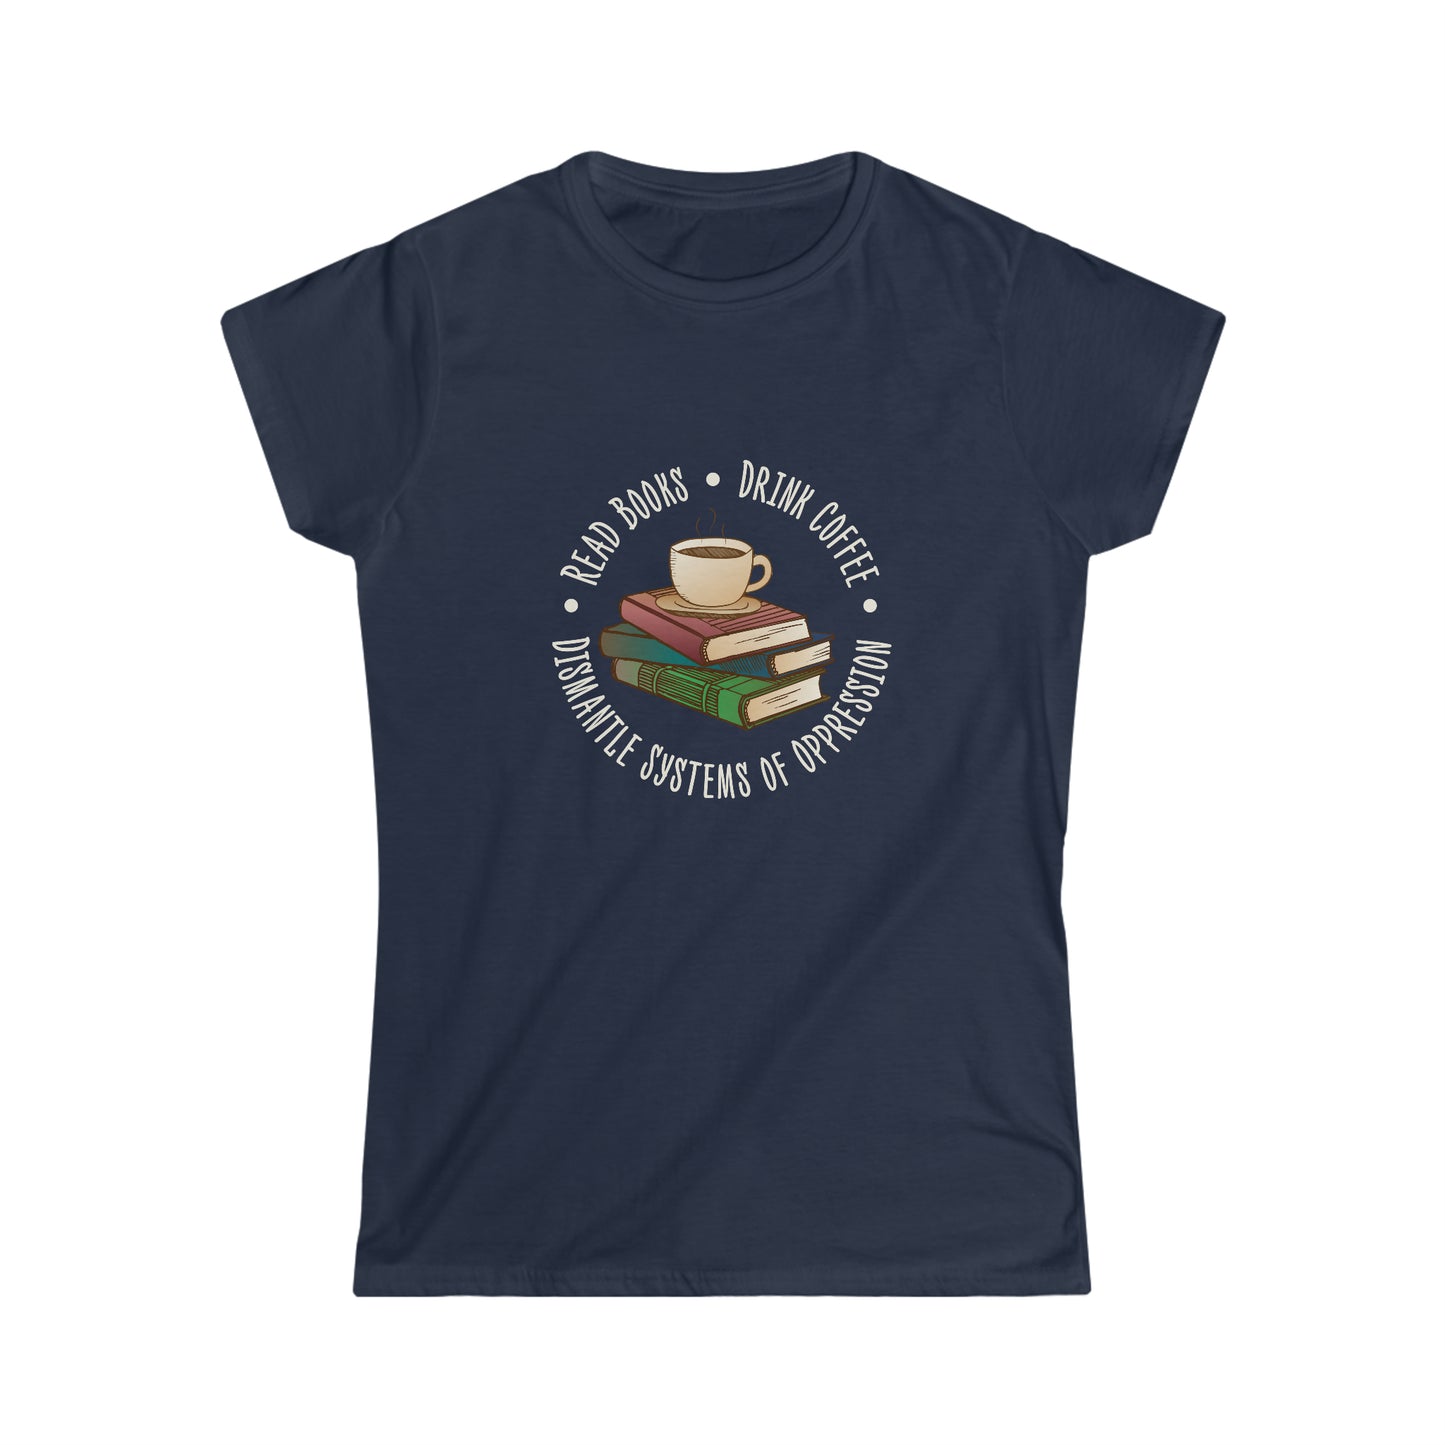 “Dismantle Systems of Oppression” Women’s T-Shirts